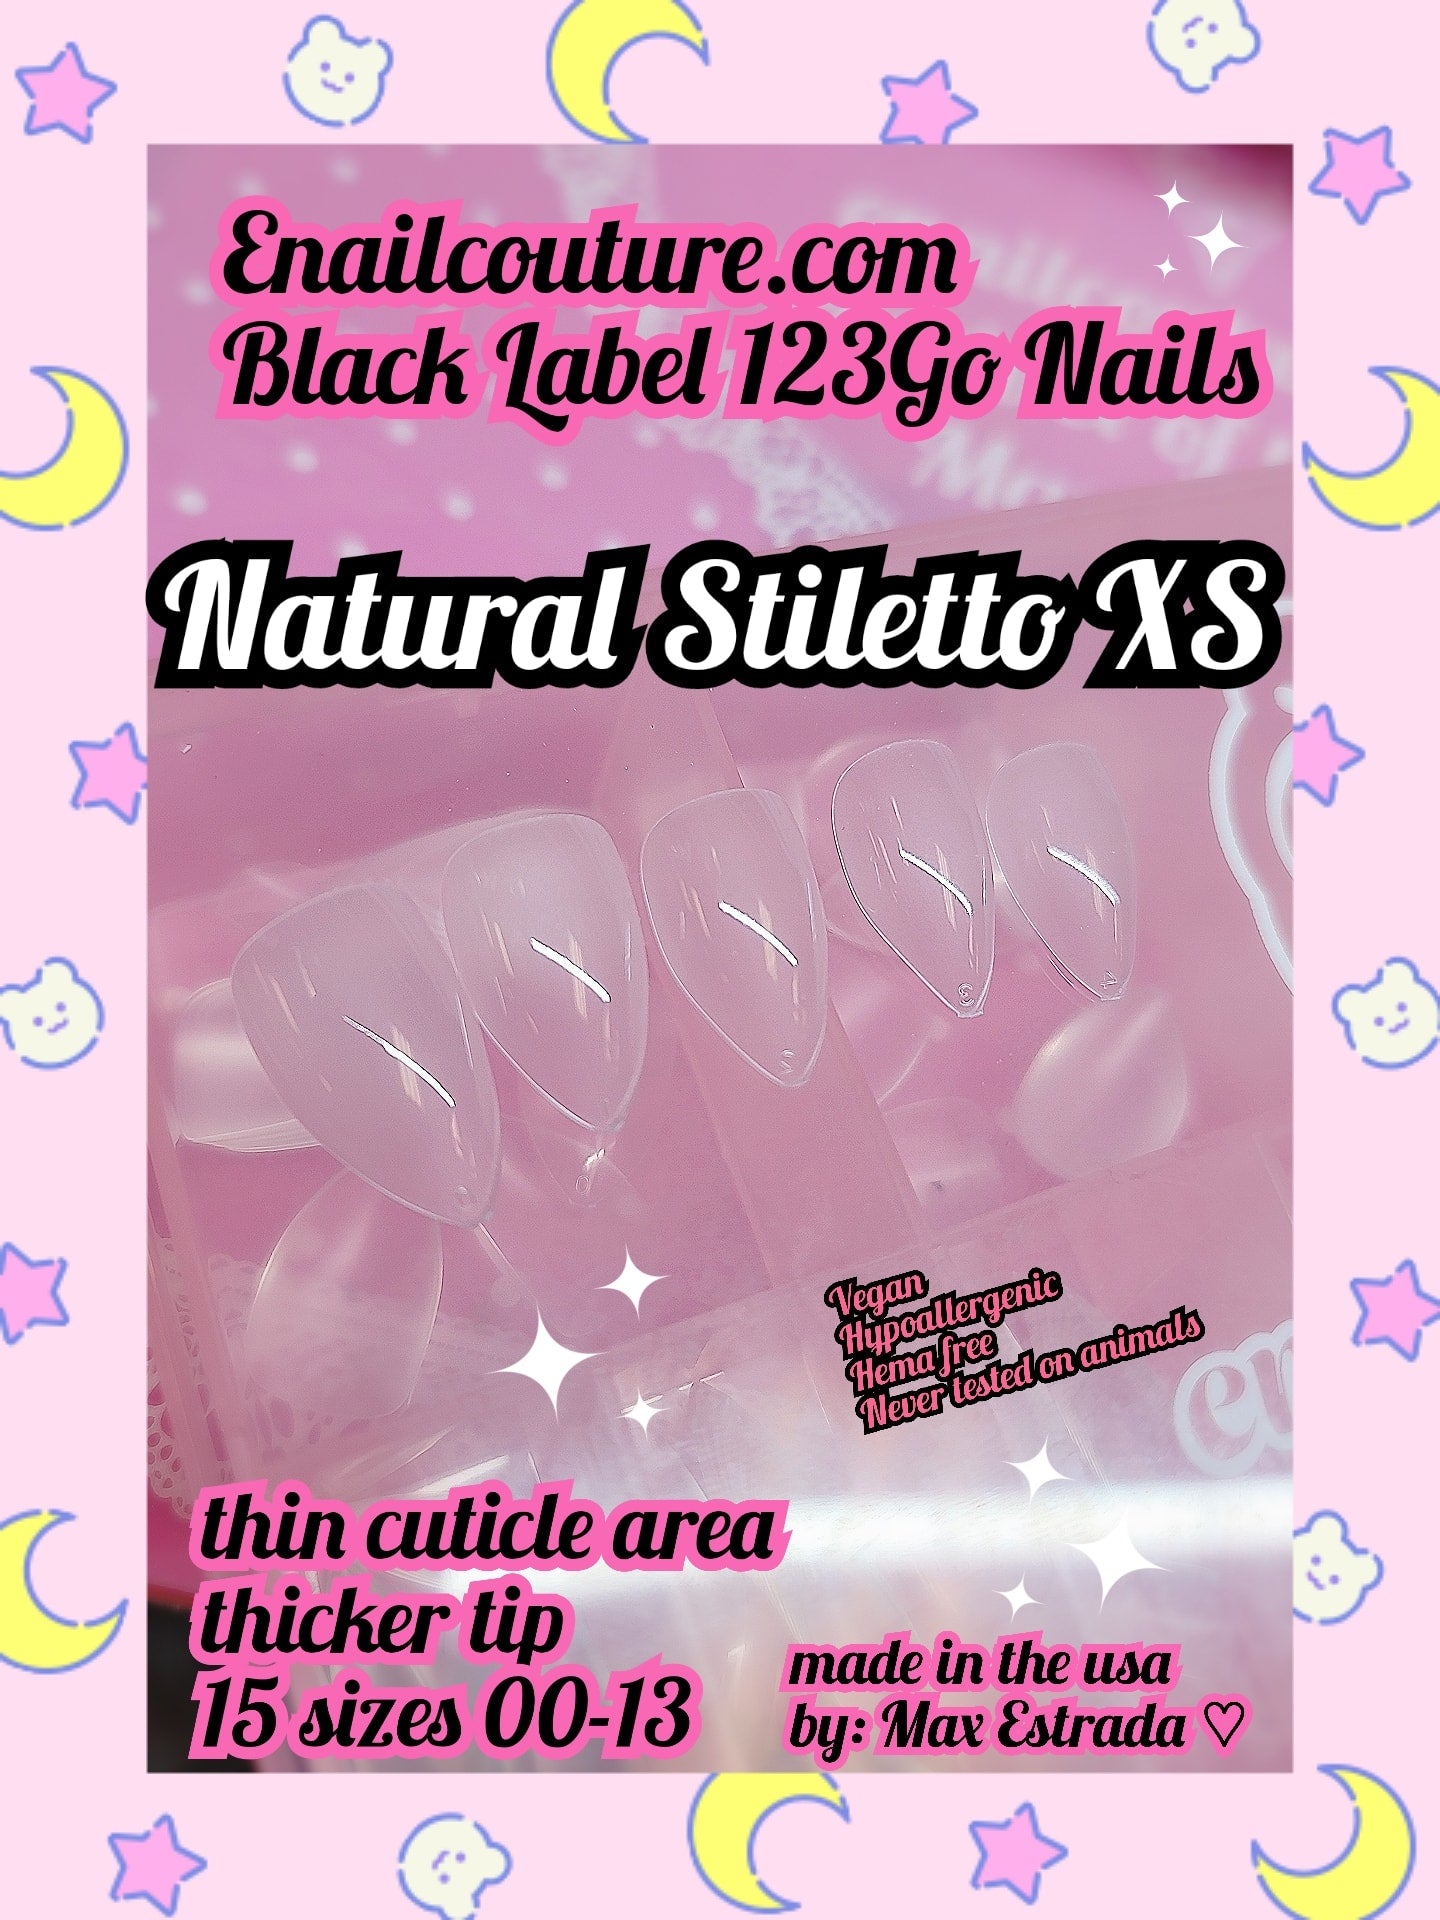 123go Black Label Nails natural stiletto XS (Soft Gel Nail Tips- Clear Cover Full Nail Extensions - Pre-shaped Acrylic False Gelly Nail Tips 15 Sizes for DIY Salon Nail Extensions)